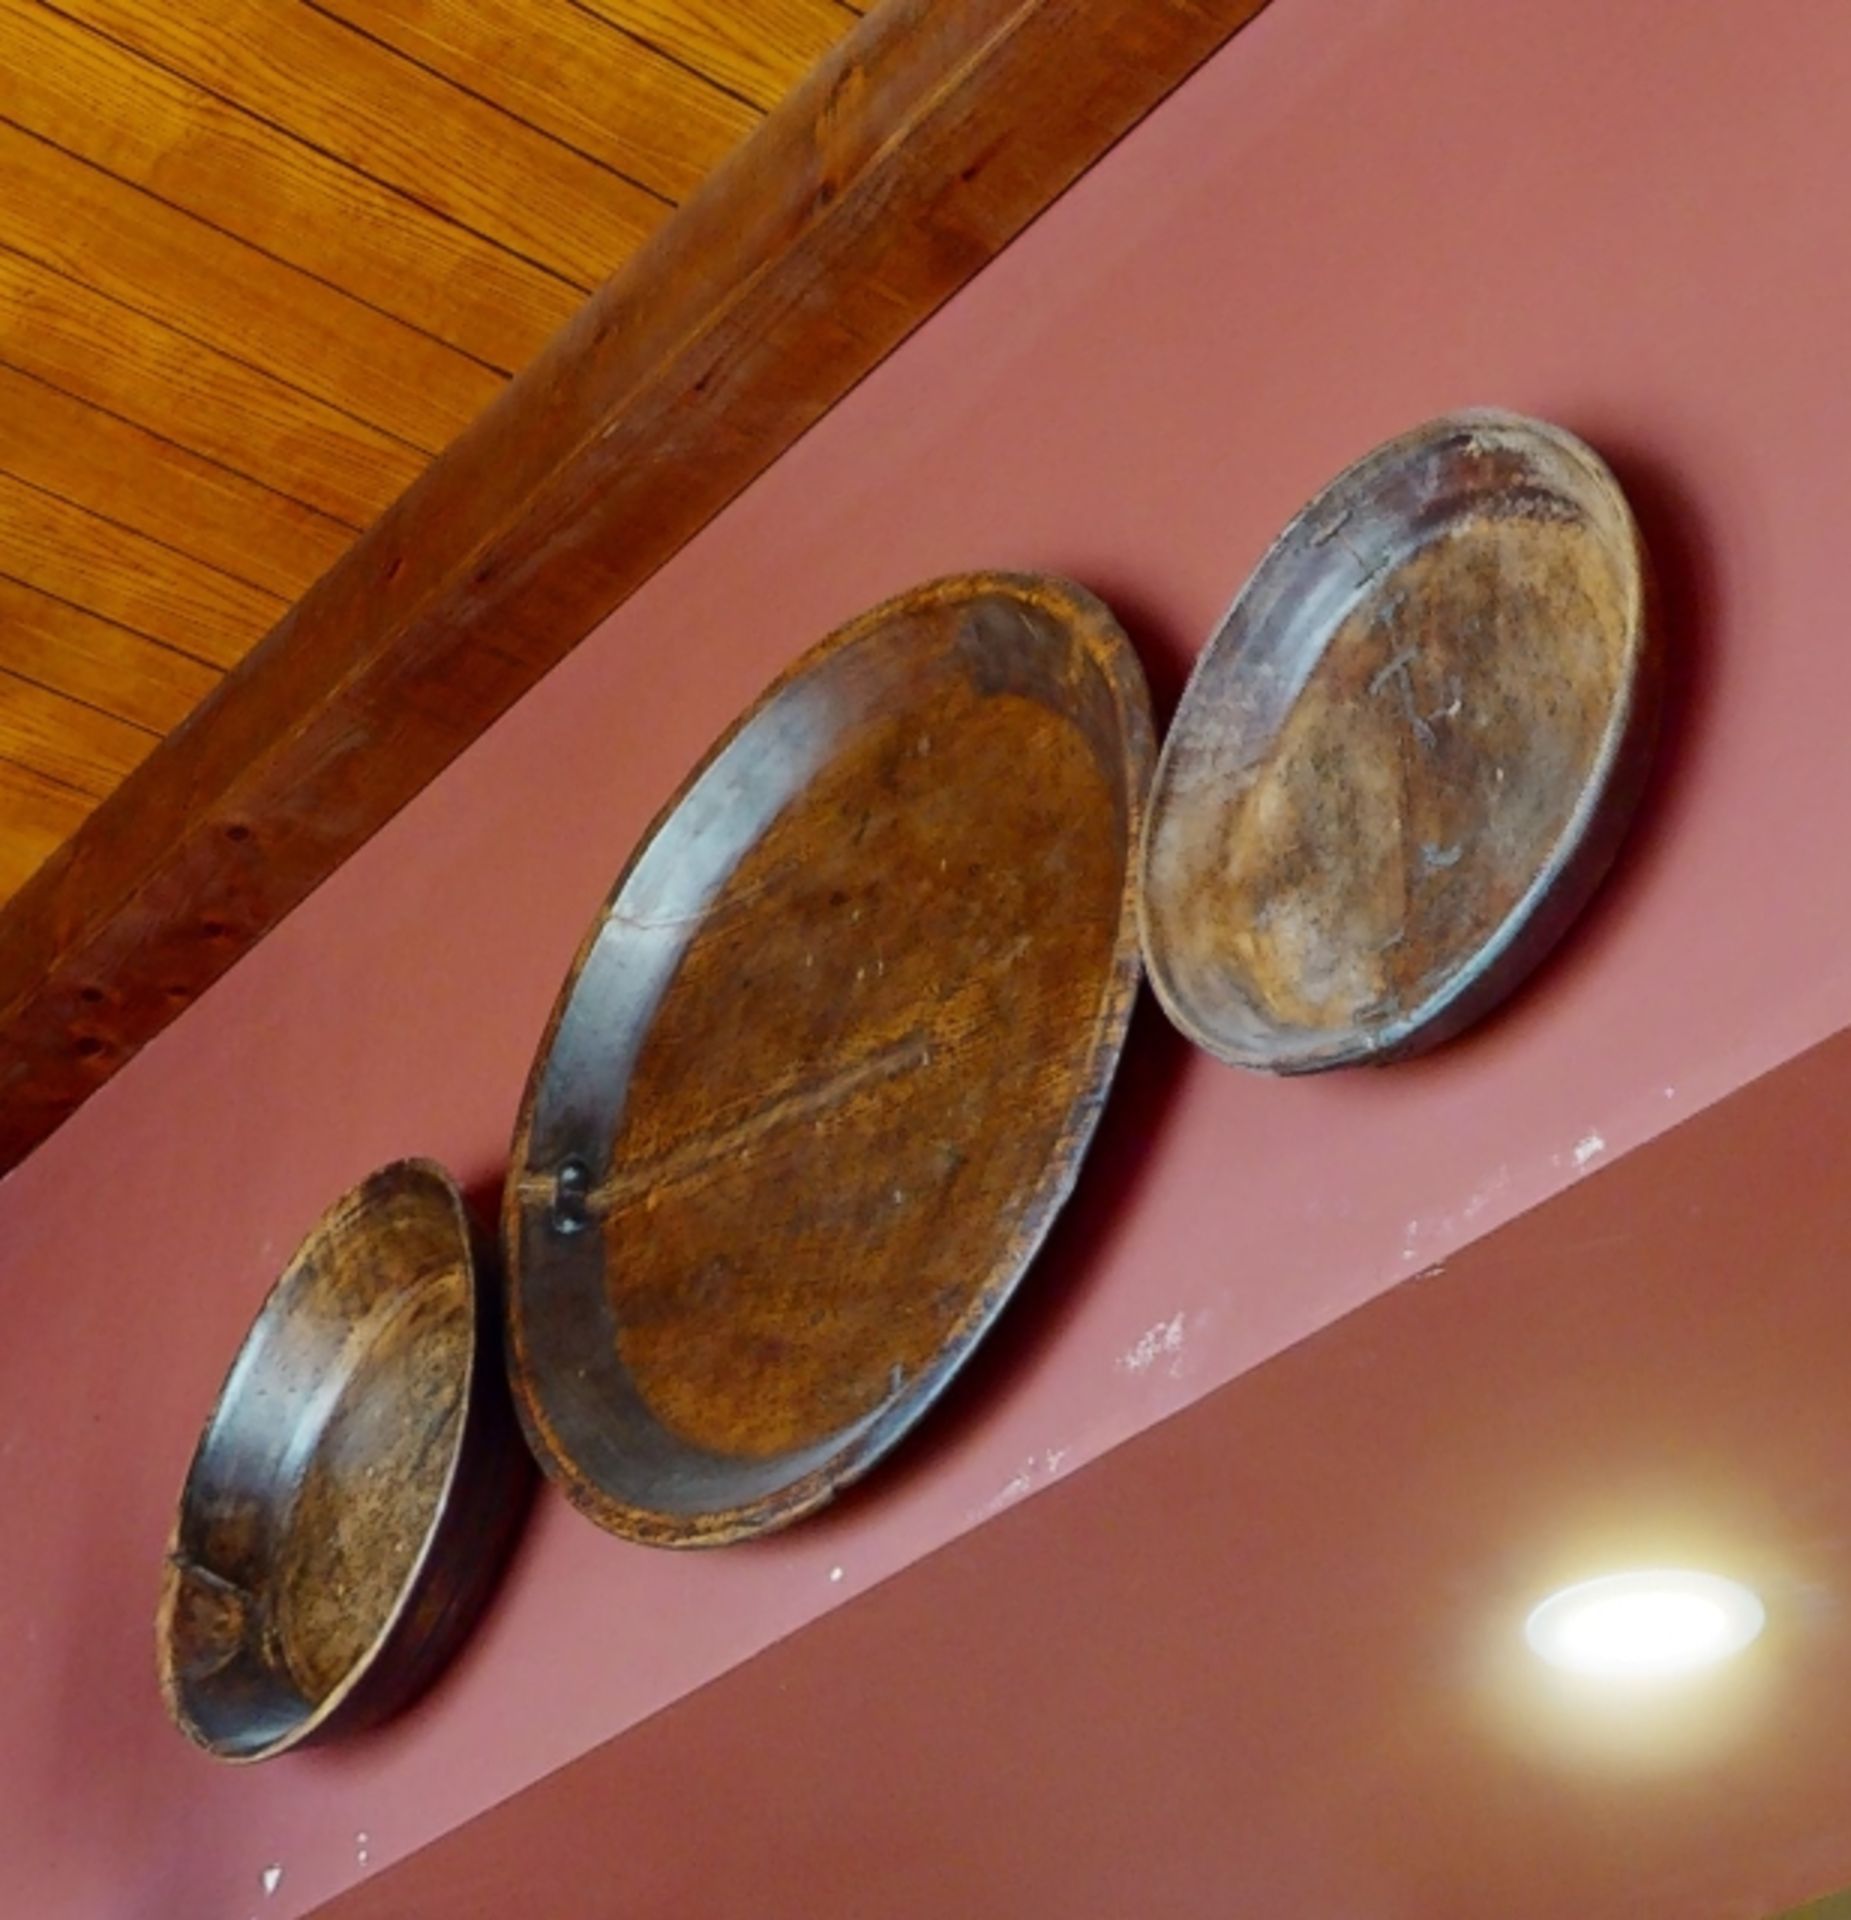 11 x Large Rustic Wooden Dishes - Wall Art From a Mexican Themed Restaurant - Image 2 of 8